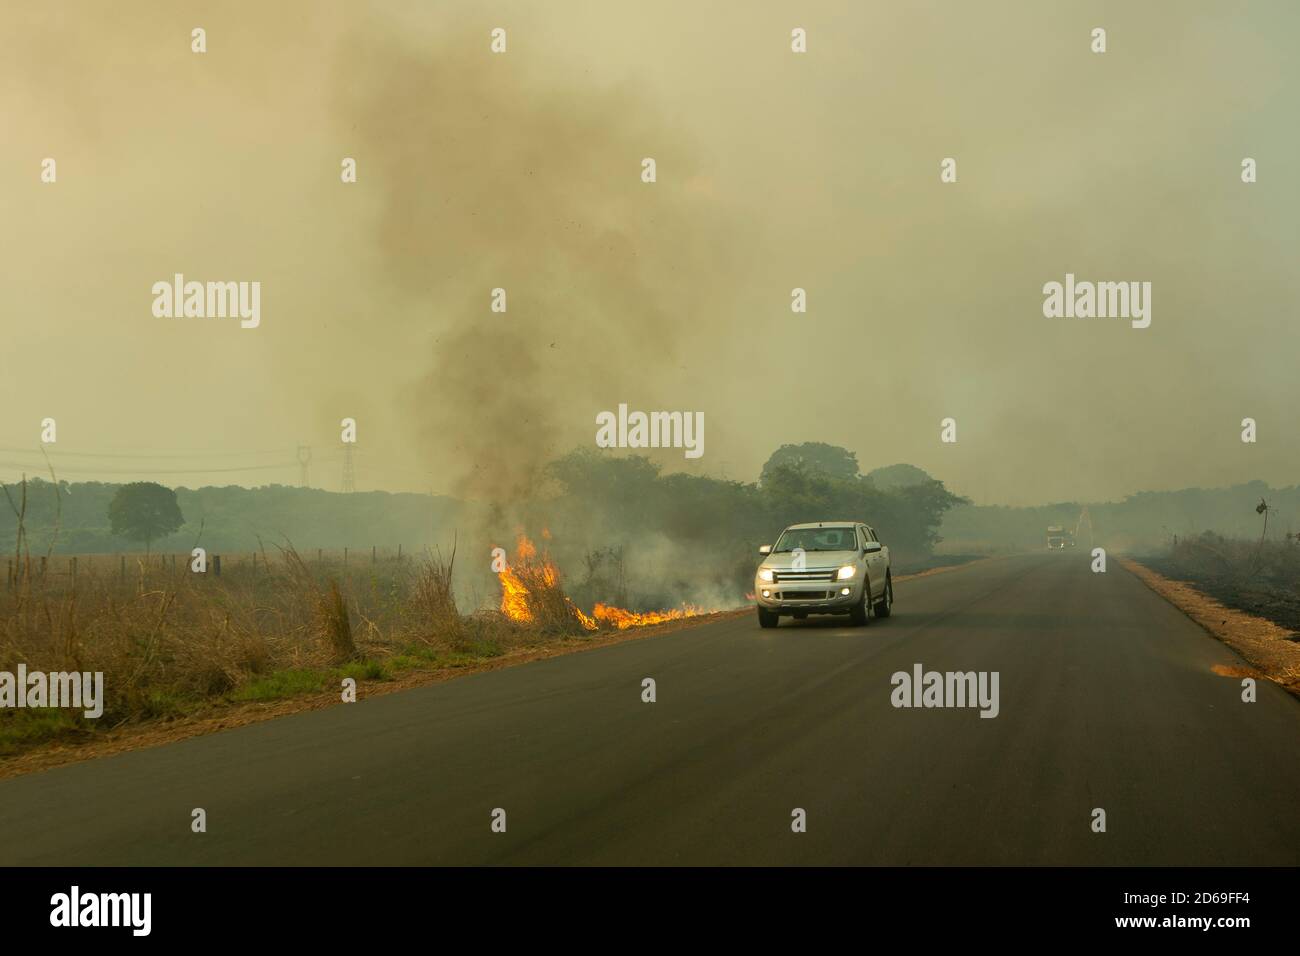 Fire and smoke on BR 163 road on Amazon during dry season and blurred car driving fast near the flames. Para state, Brazil. Concept of environment. Stock Photo